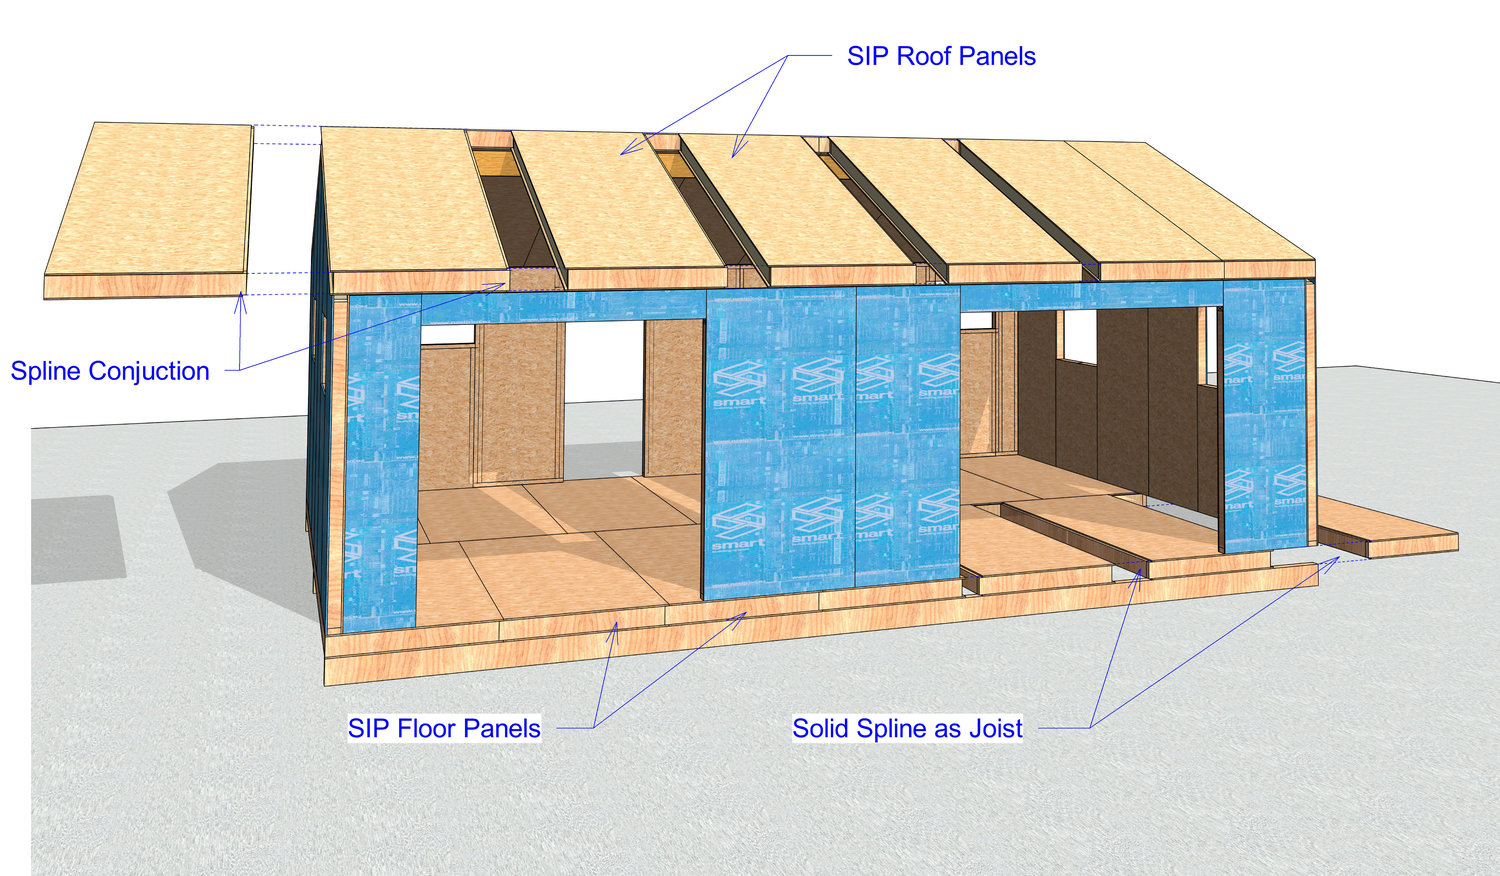 196: Why aren’t more houses being built using SIPs?